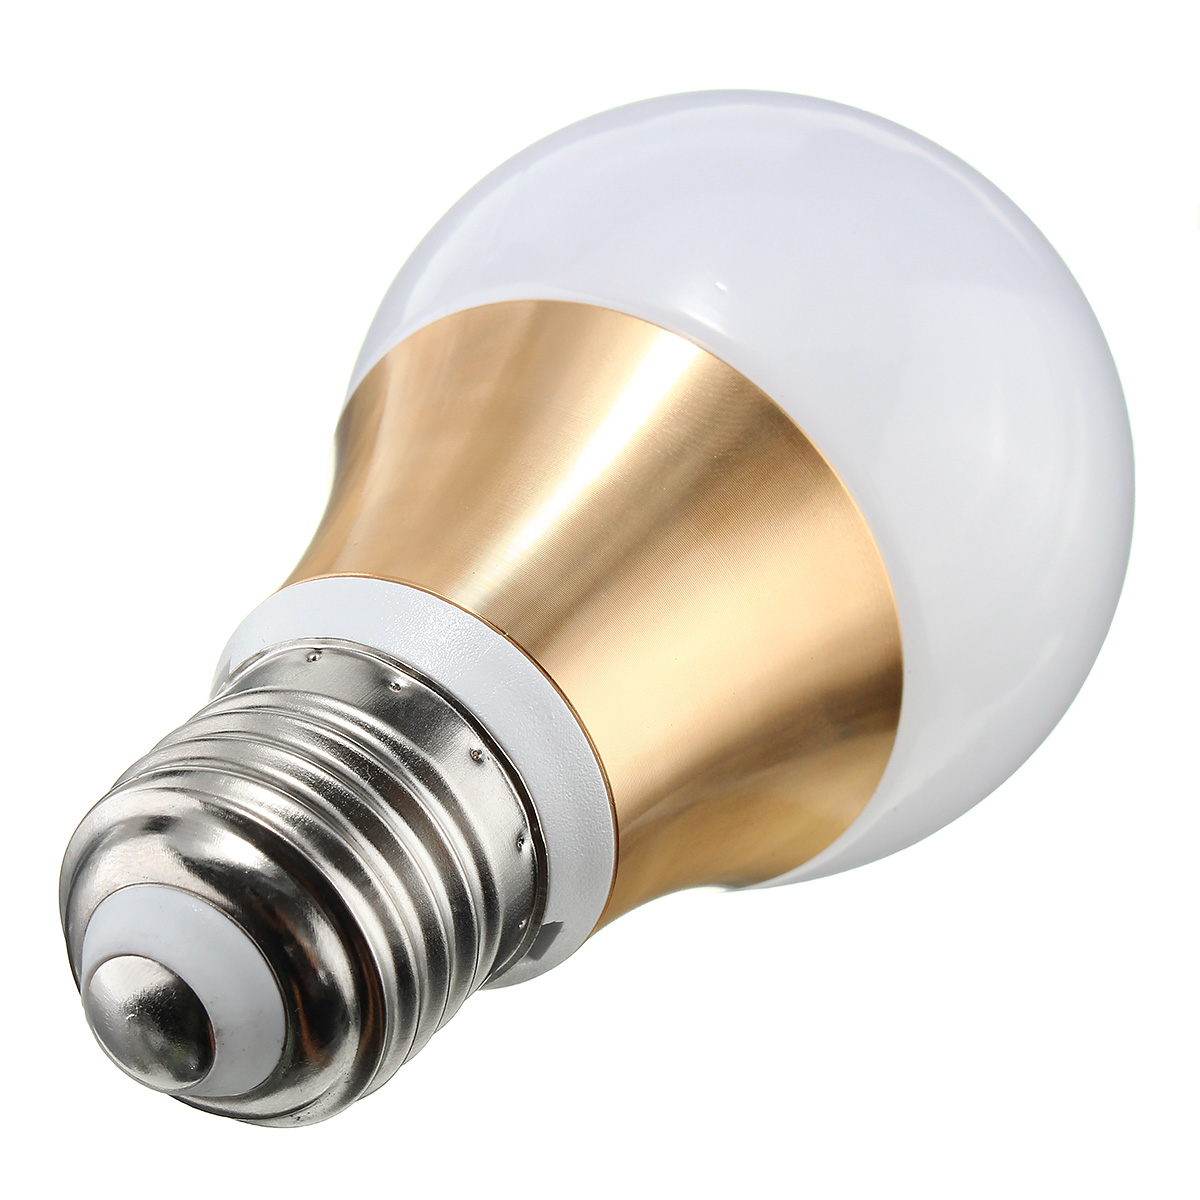 E27-B22-5W-5730-SMD-450LM-LED-Globe-Light-Bulb-Home-Lamp-Decoration-Non-dimmable-AC85-265V-1145768-5